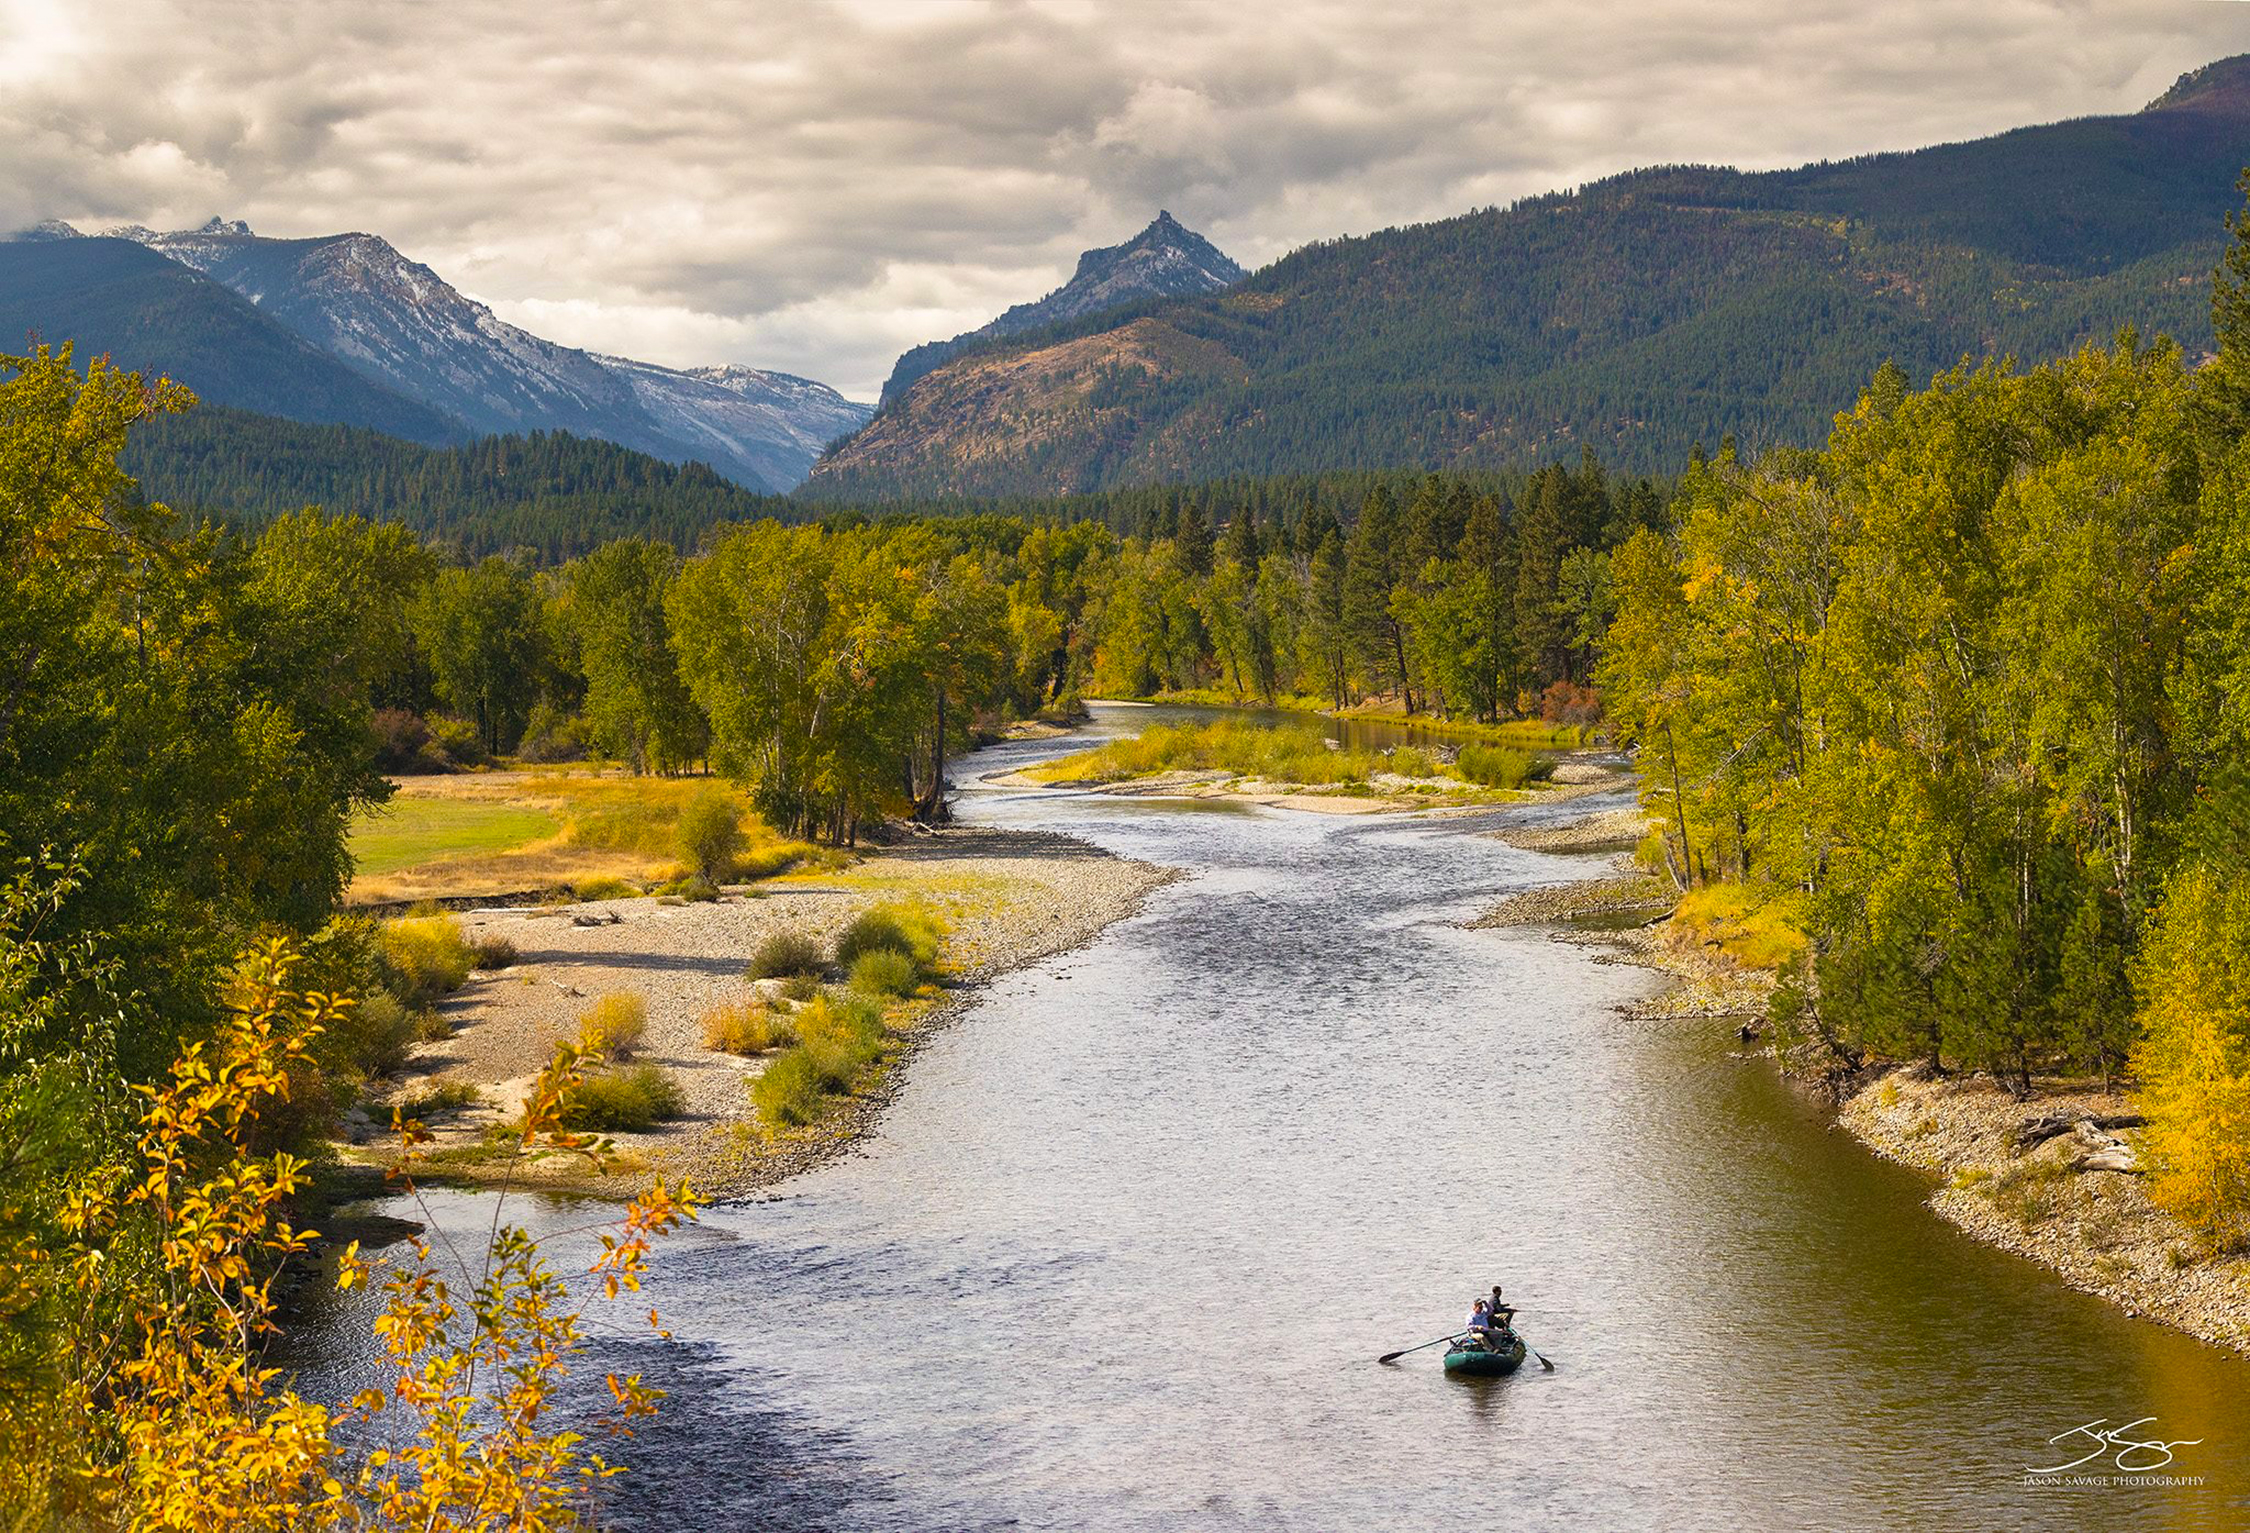 Kayaker on the Bitterroot River in Montana surrounded by mountains